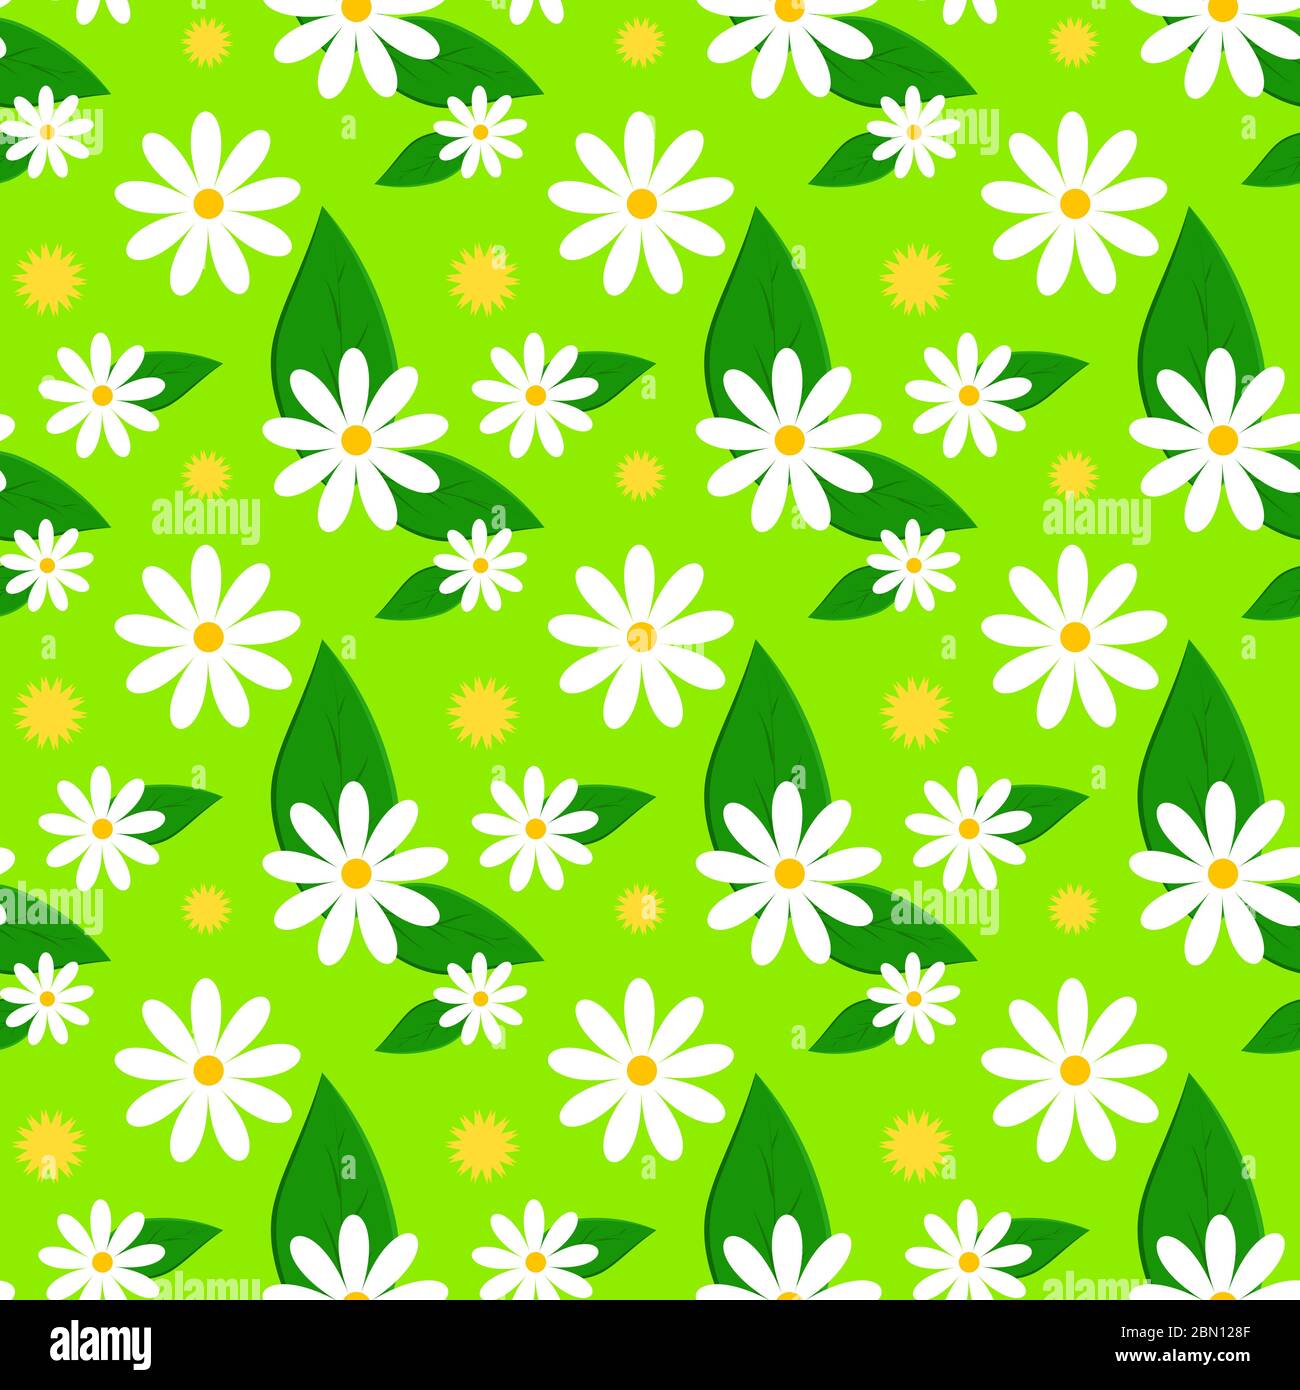 Floral seamless vector pattern with daisies, dandelions and leaves. Bright spring seamless vector background with flowers Stock Vector